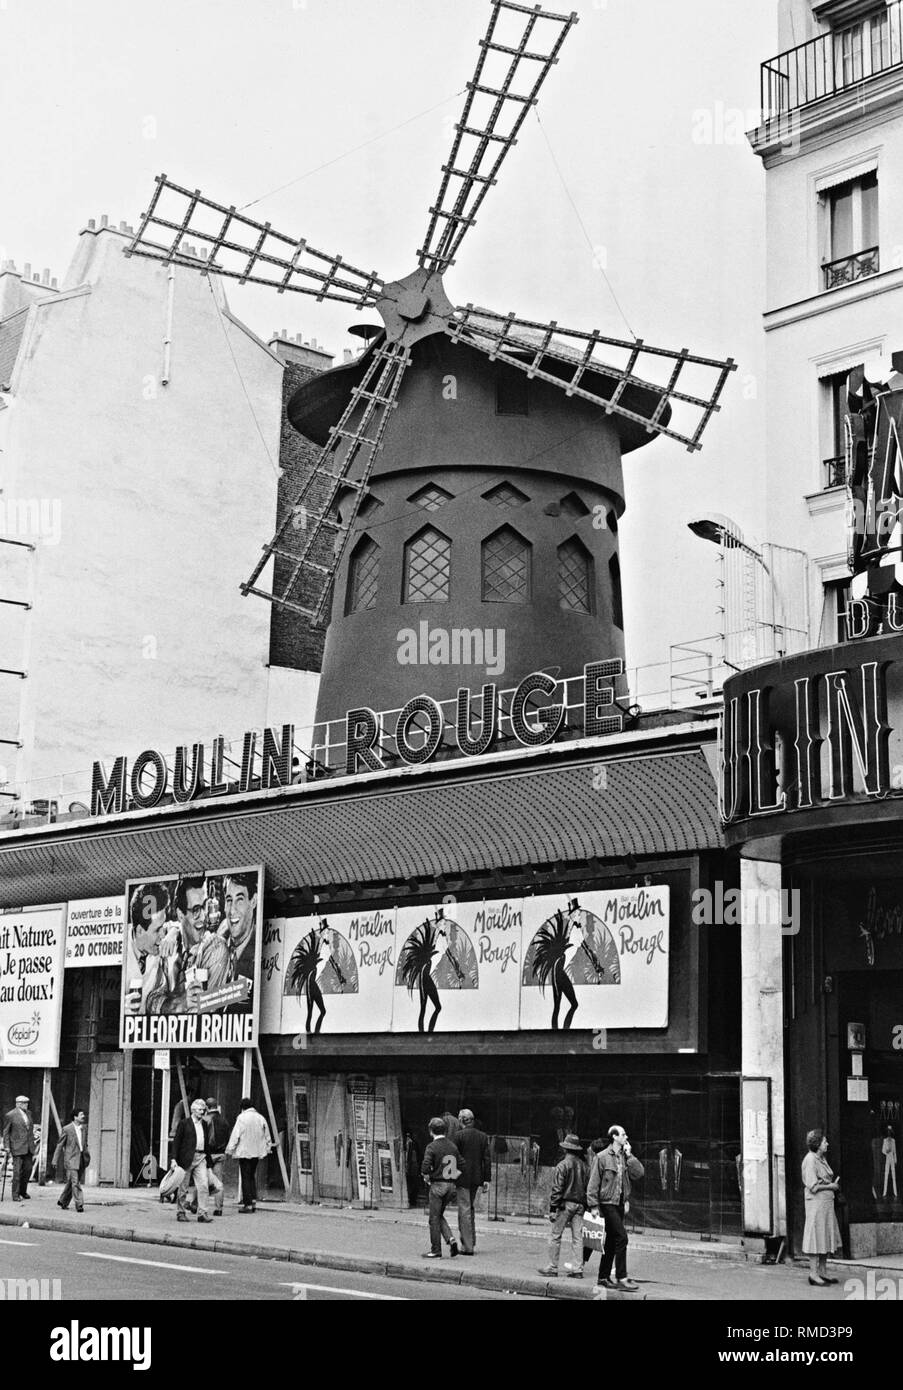 The Moulin Rouge nightclub opened in 1889 on the Boulevard de Clichy in the  district of Montmartre in Paris. EDITORIAL USE ONLY! Nur redaktionelle Verwendung! Stock Photo